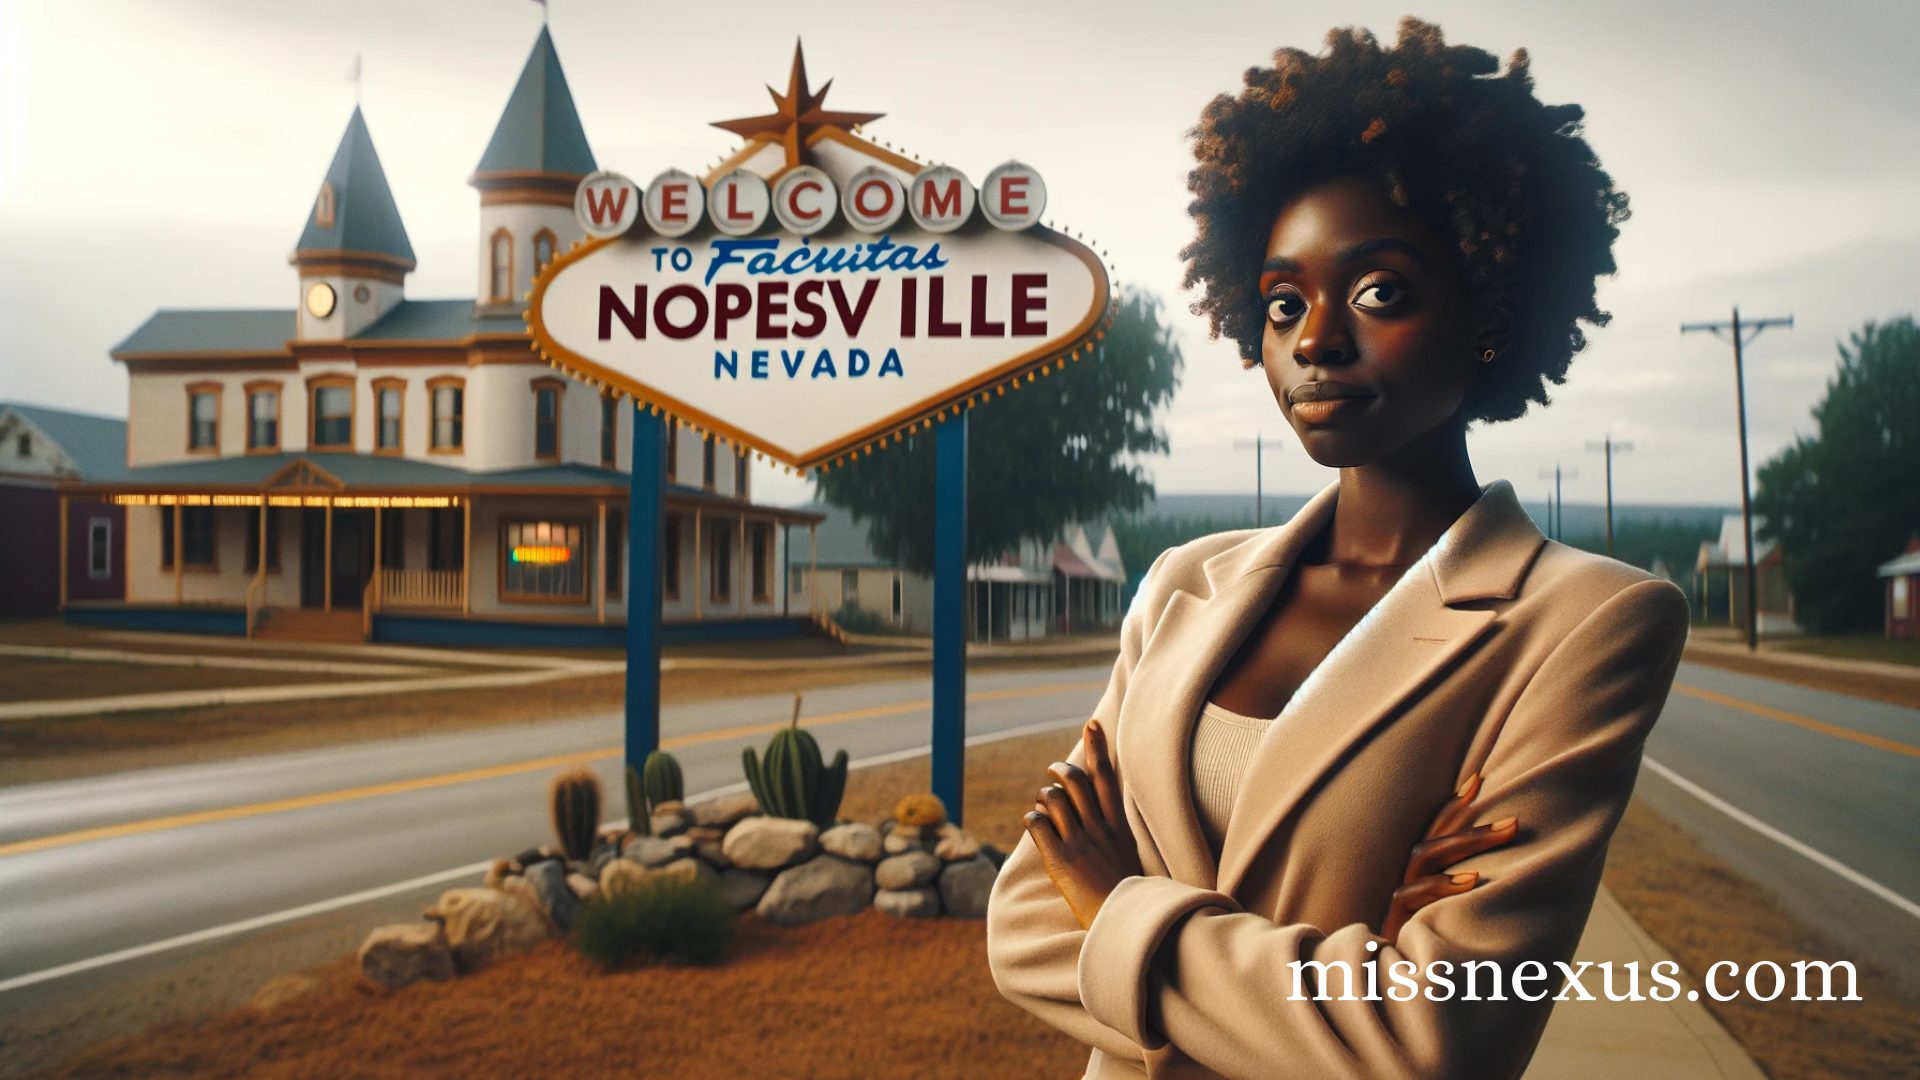 A young Black woman standing confidently in front of the capital of Nopesville. She exudes a sense of skeptical, dry humor, and directness. The setting is whimsical, with a large Welcome to Nopesville sign, styled humorously, at the town's entrance. The image captures a light-hearted yet candid atmosphere, blending realism with a touch of playful imagination. The scene is set in the late afternoon with soft lighting.